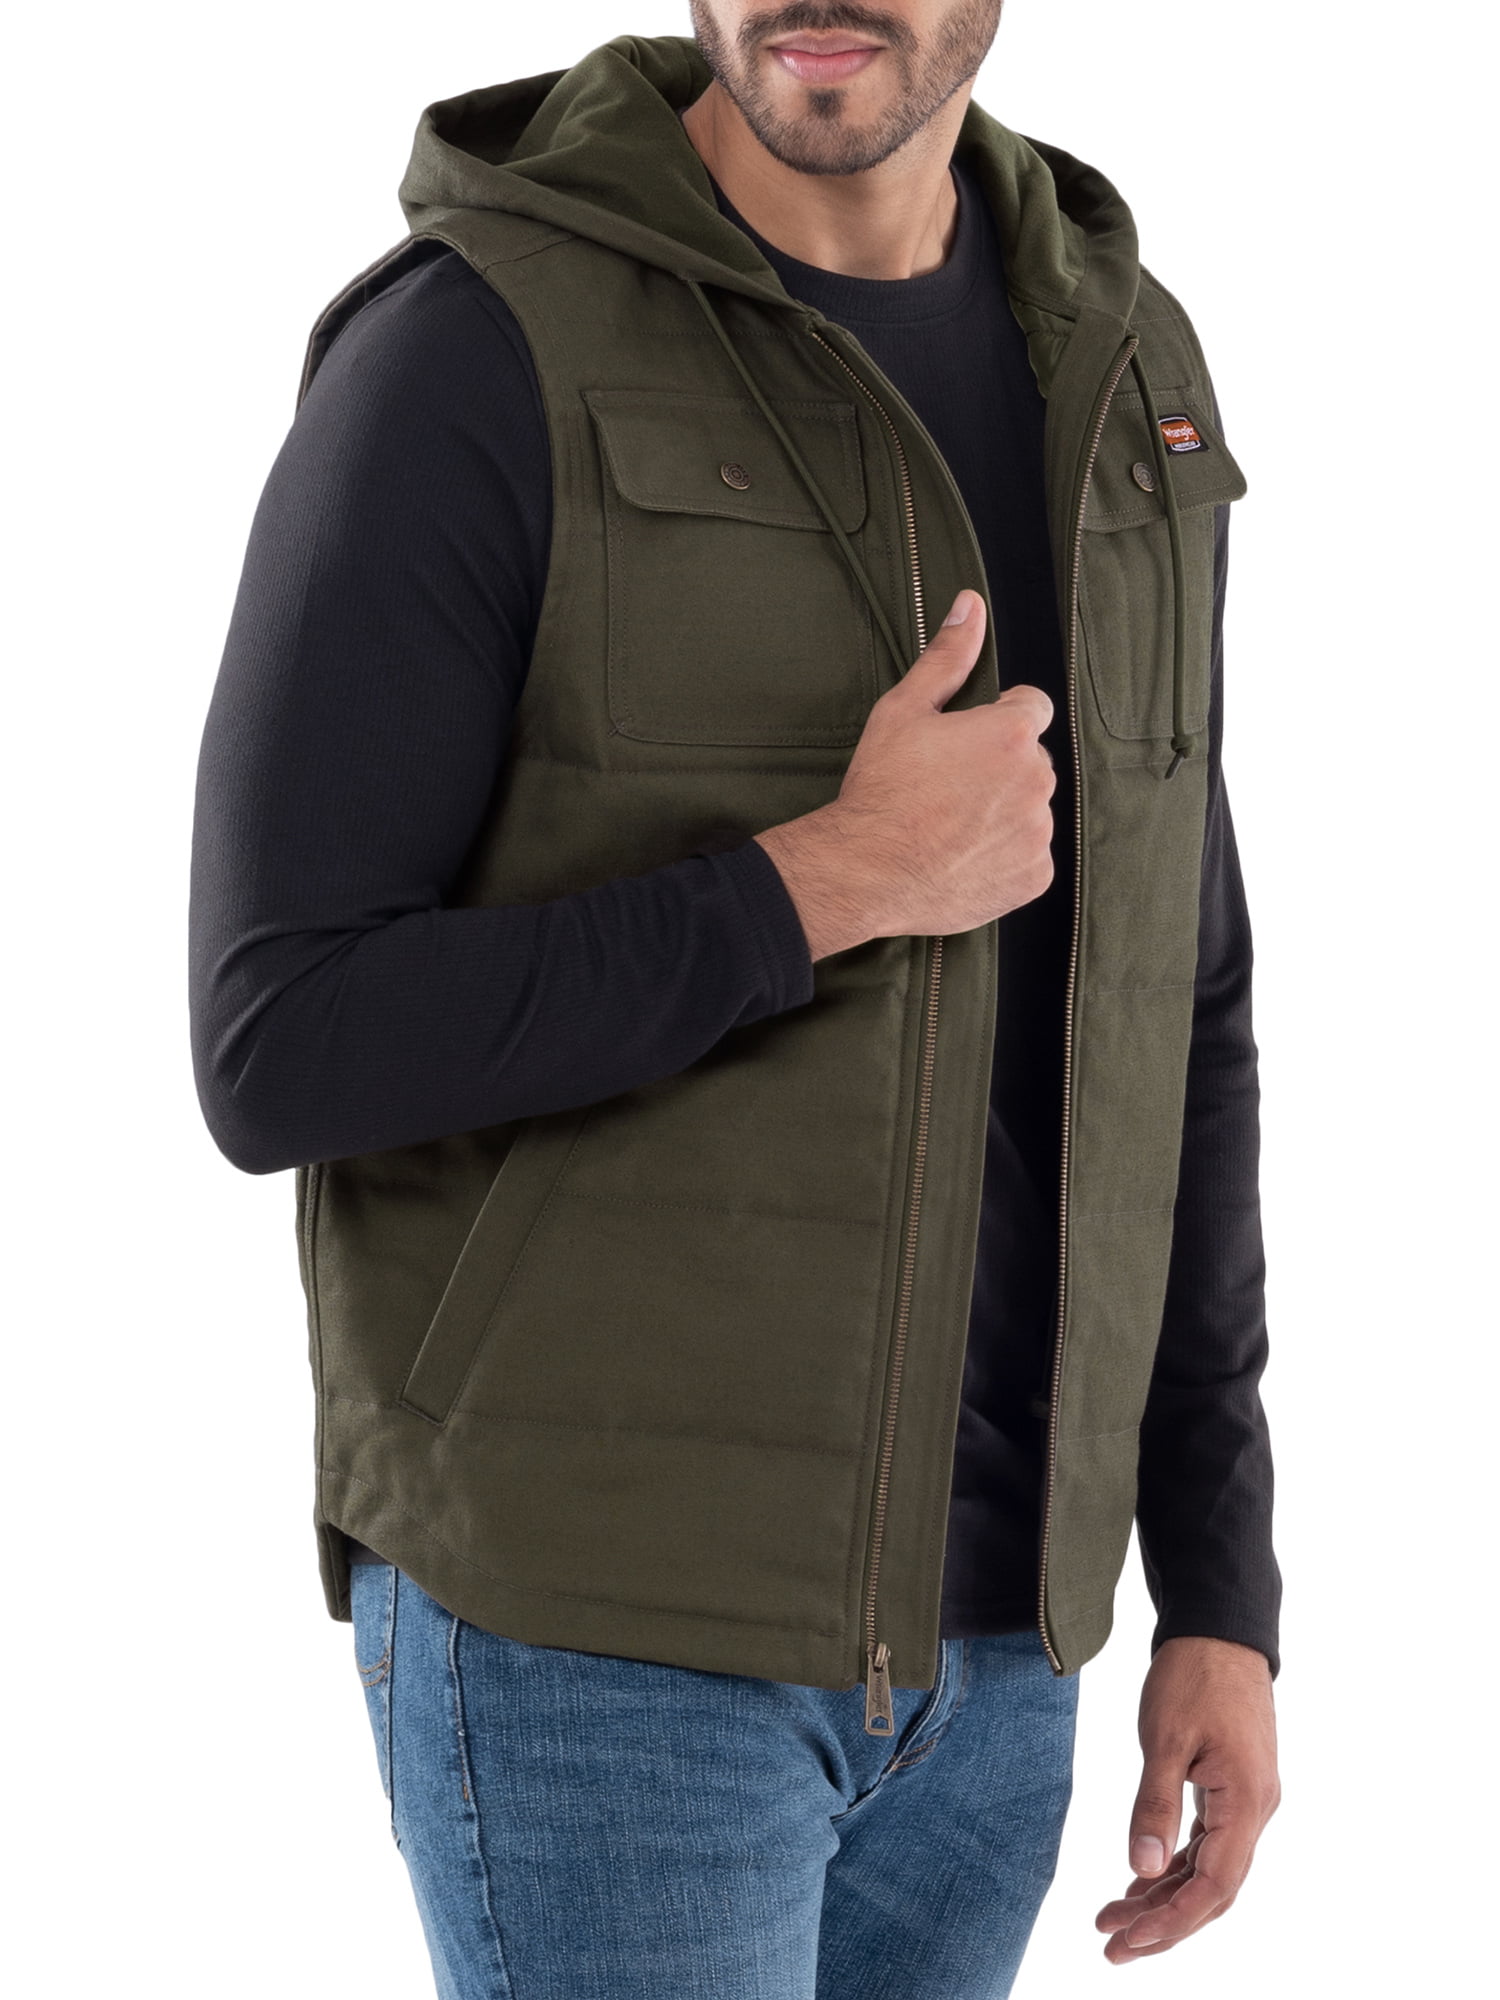 Wrangler Workwear Men's Quilted Lined Duck Vest with Hood 